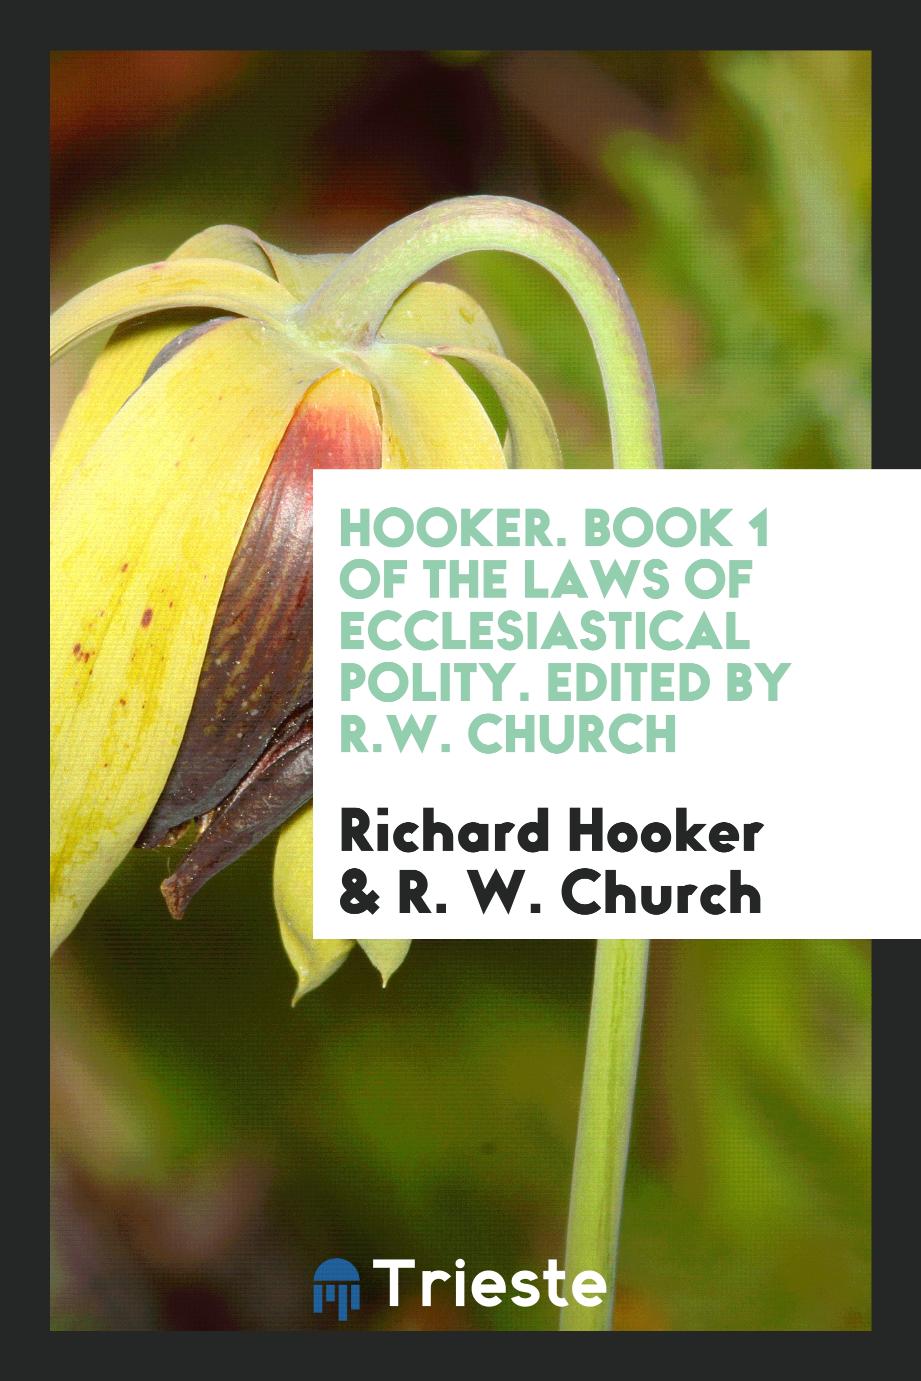 Hooker. Book 1 of the laws of ecclesiastical polity. Edited by R.W. Church